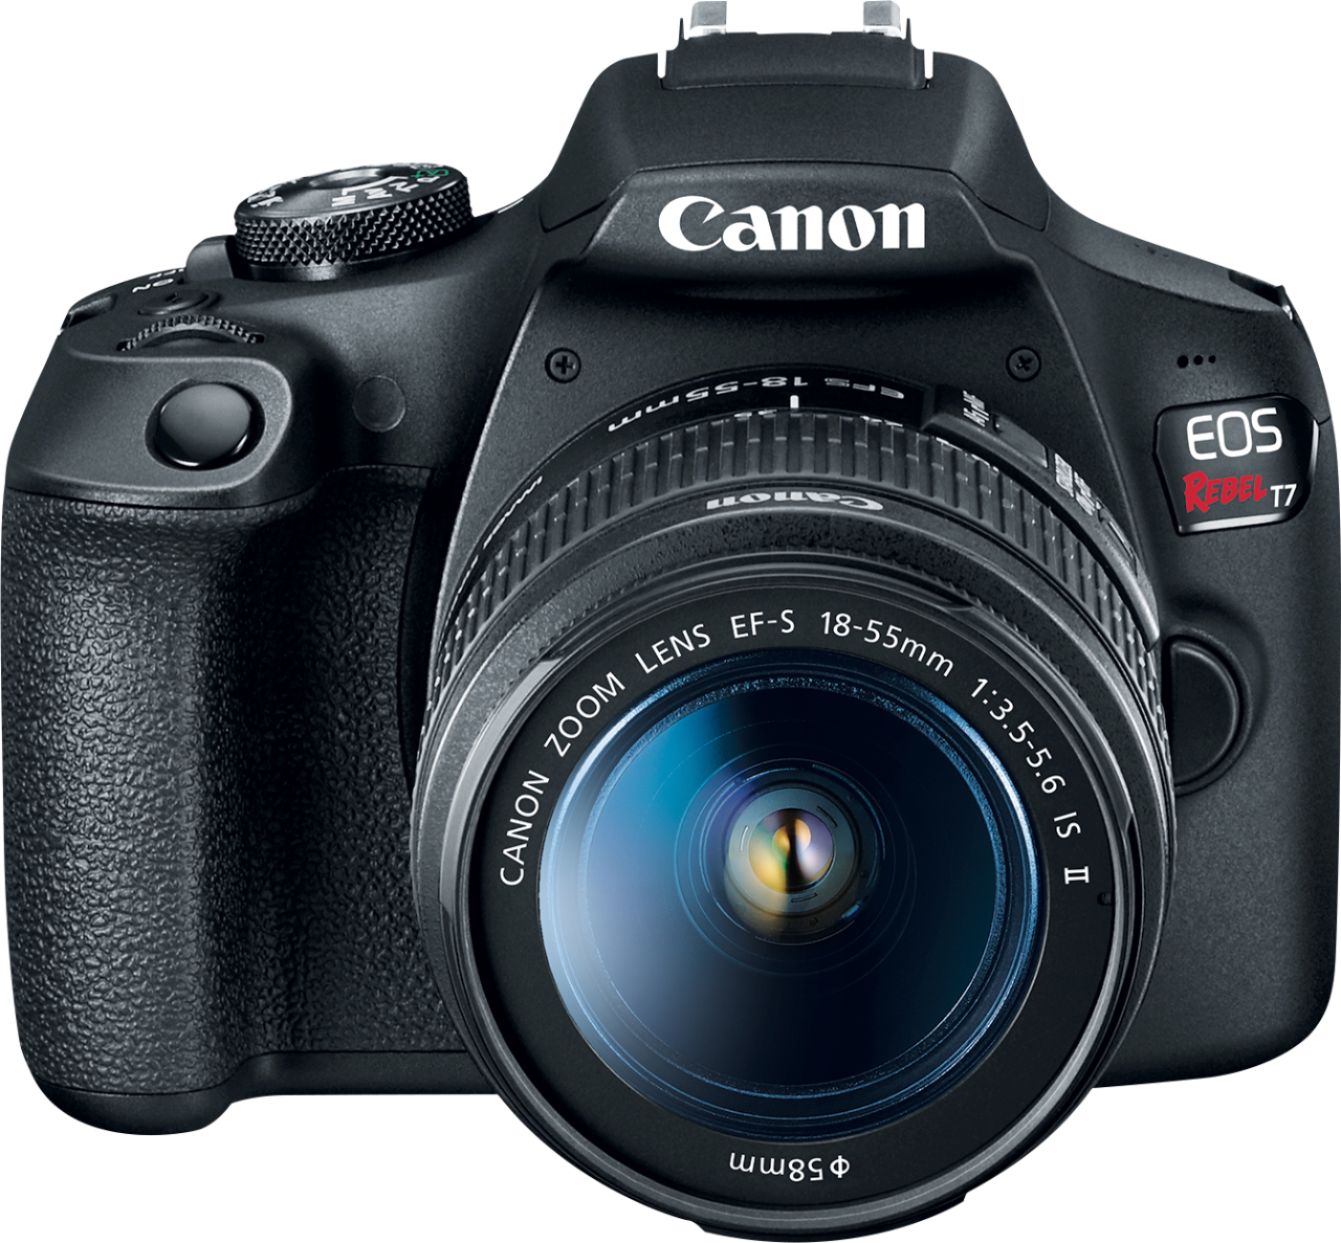 Canon EOS Rebel T7 DSLR Video Camera with Lens Black - Best Buy